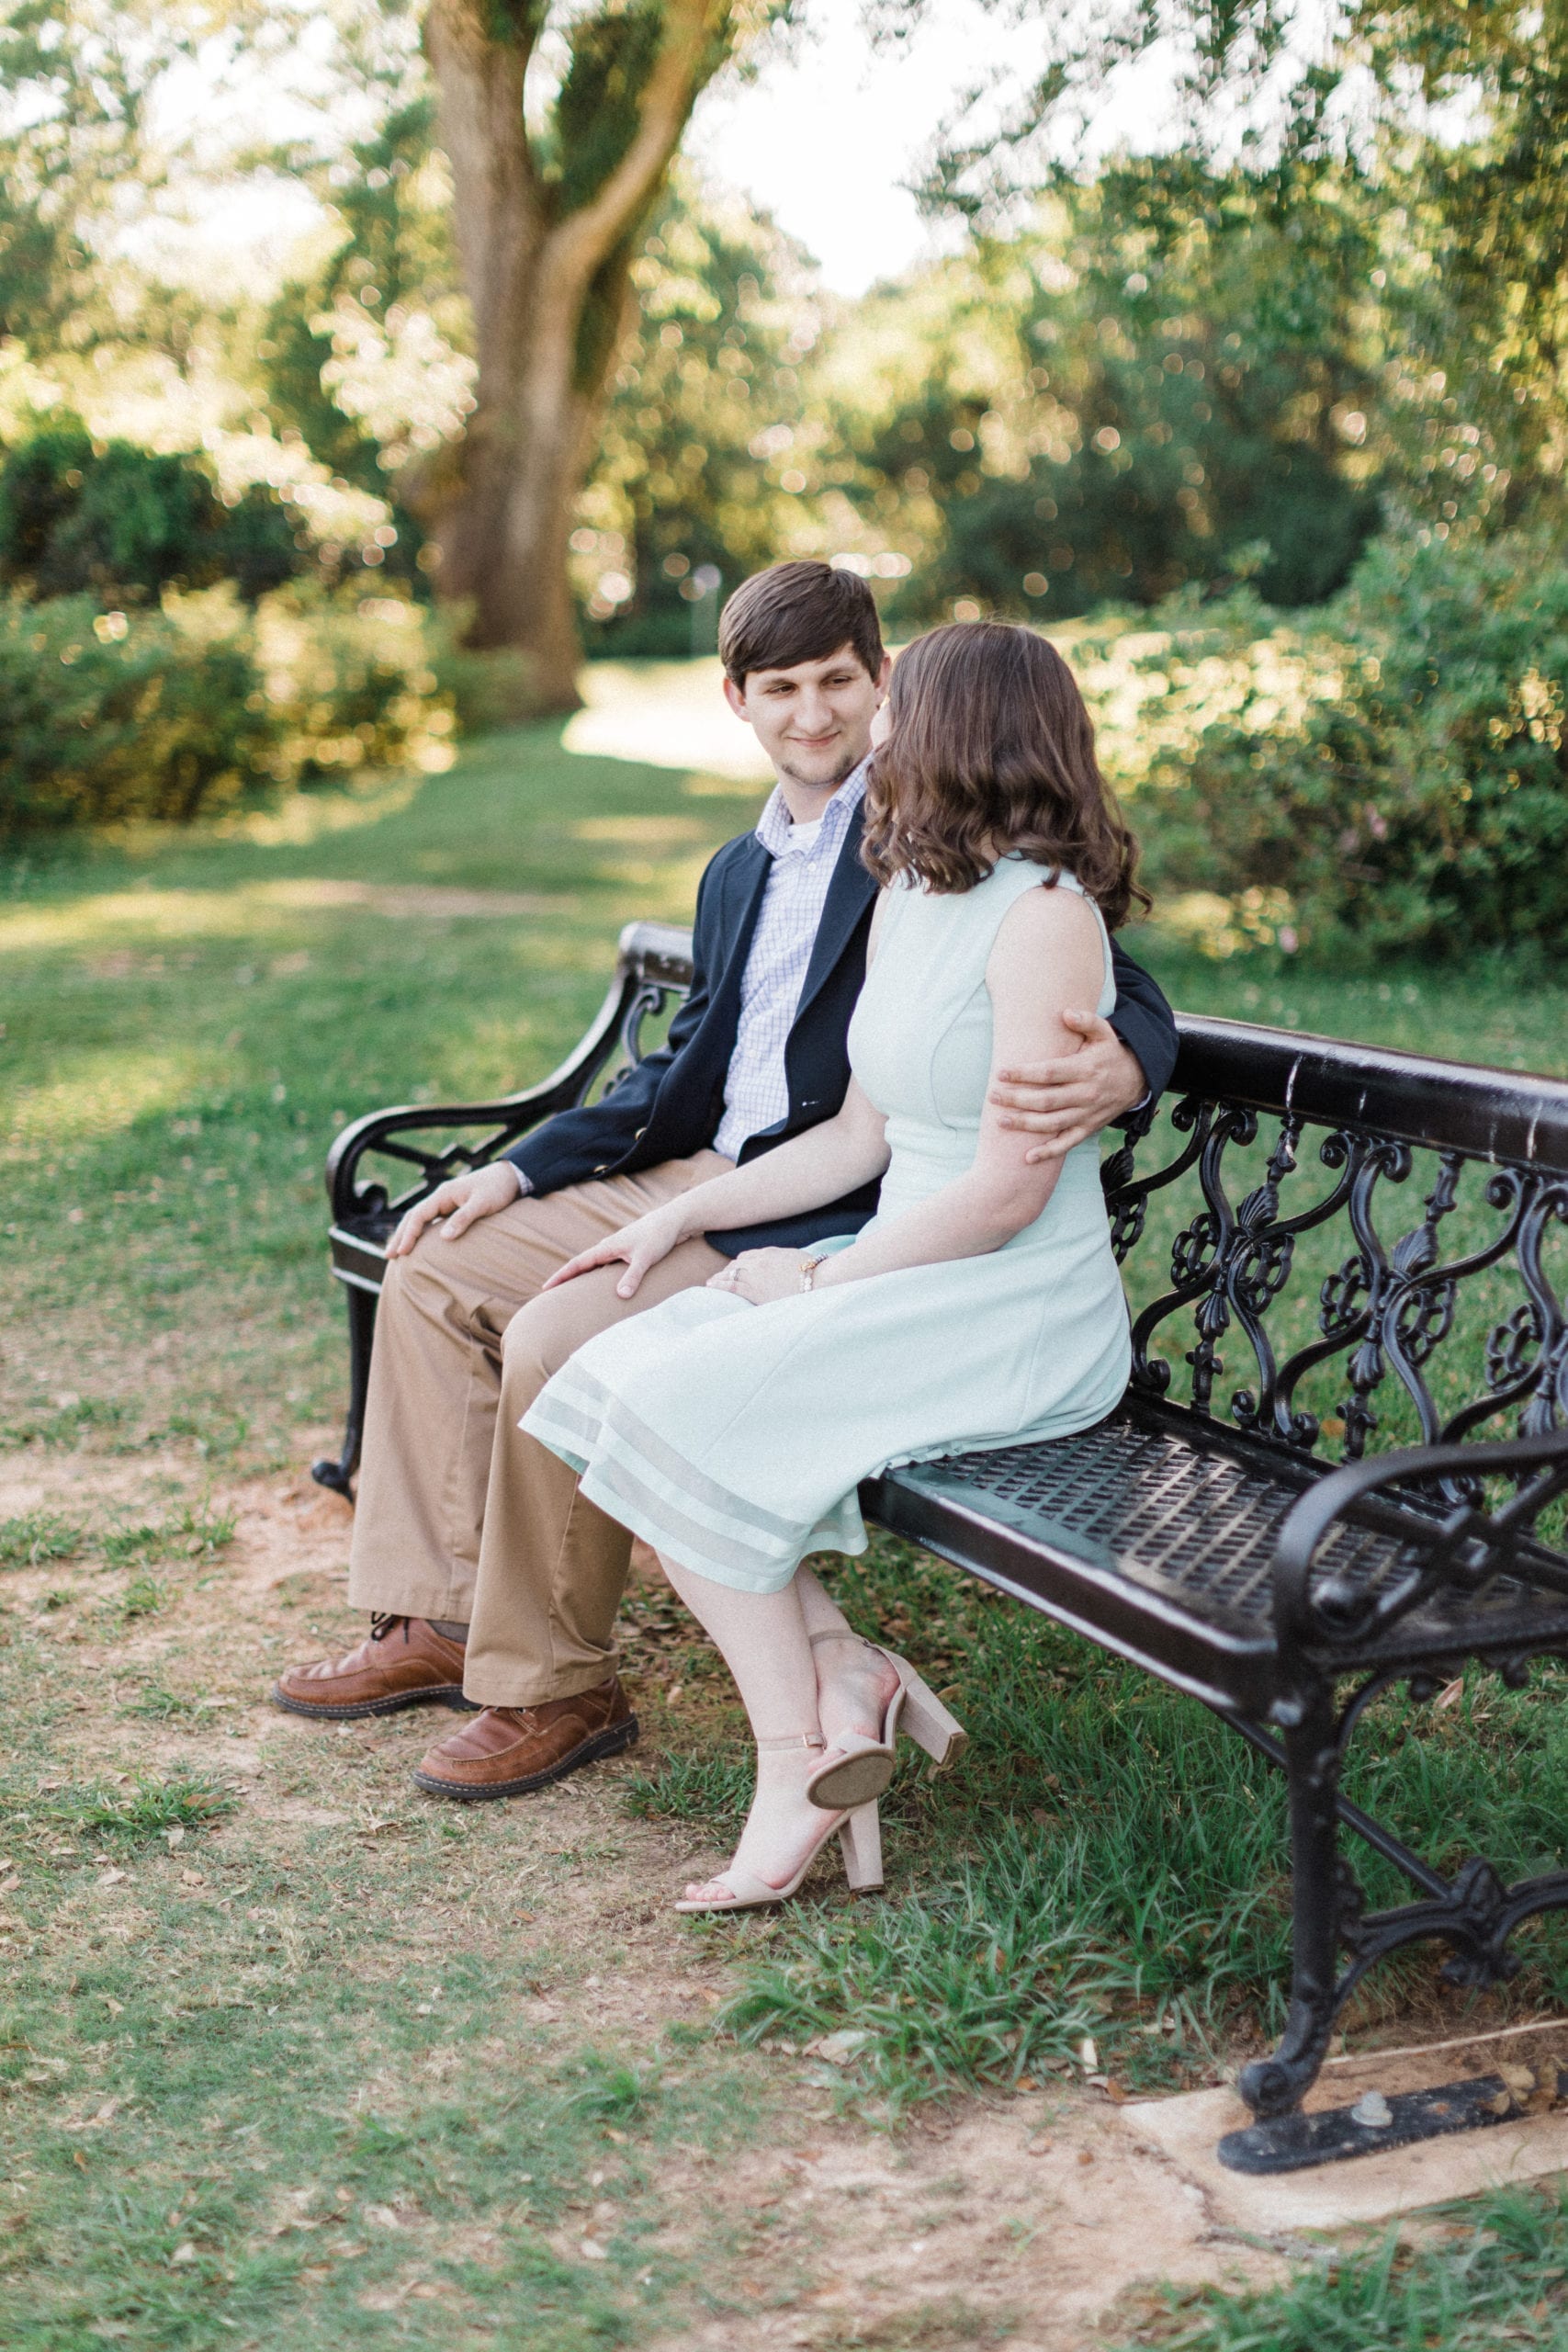 couple sit on bench